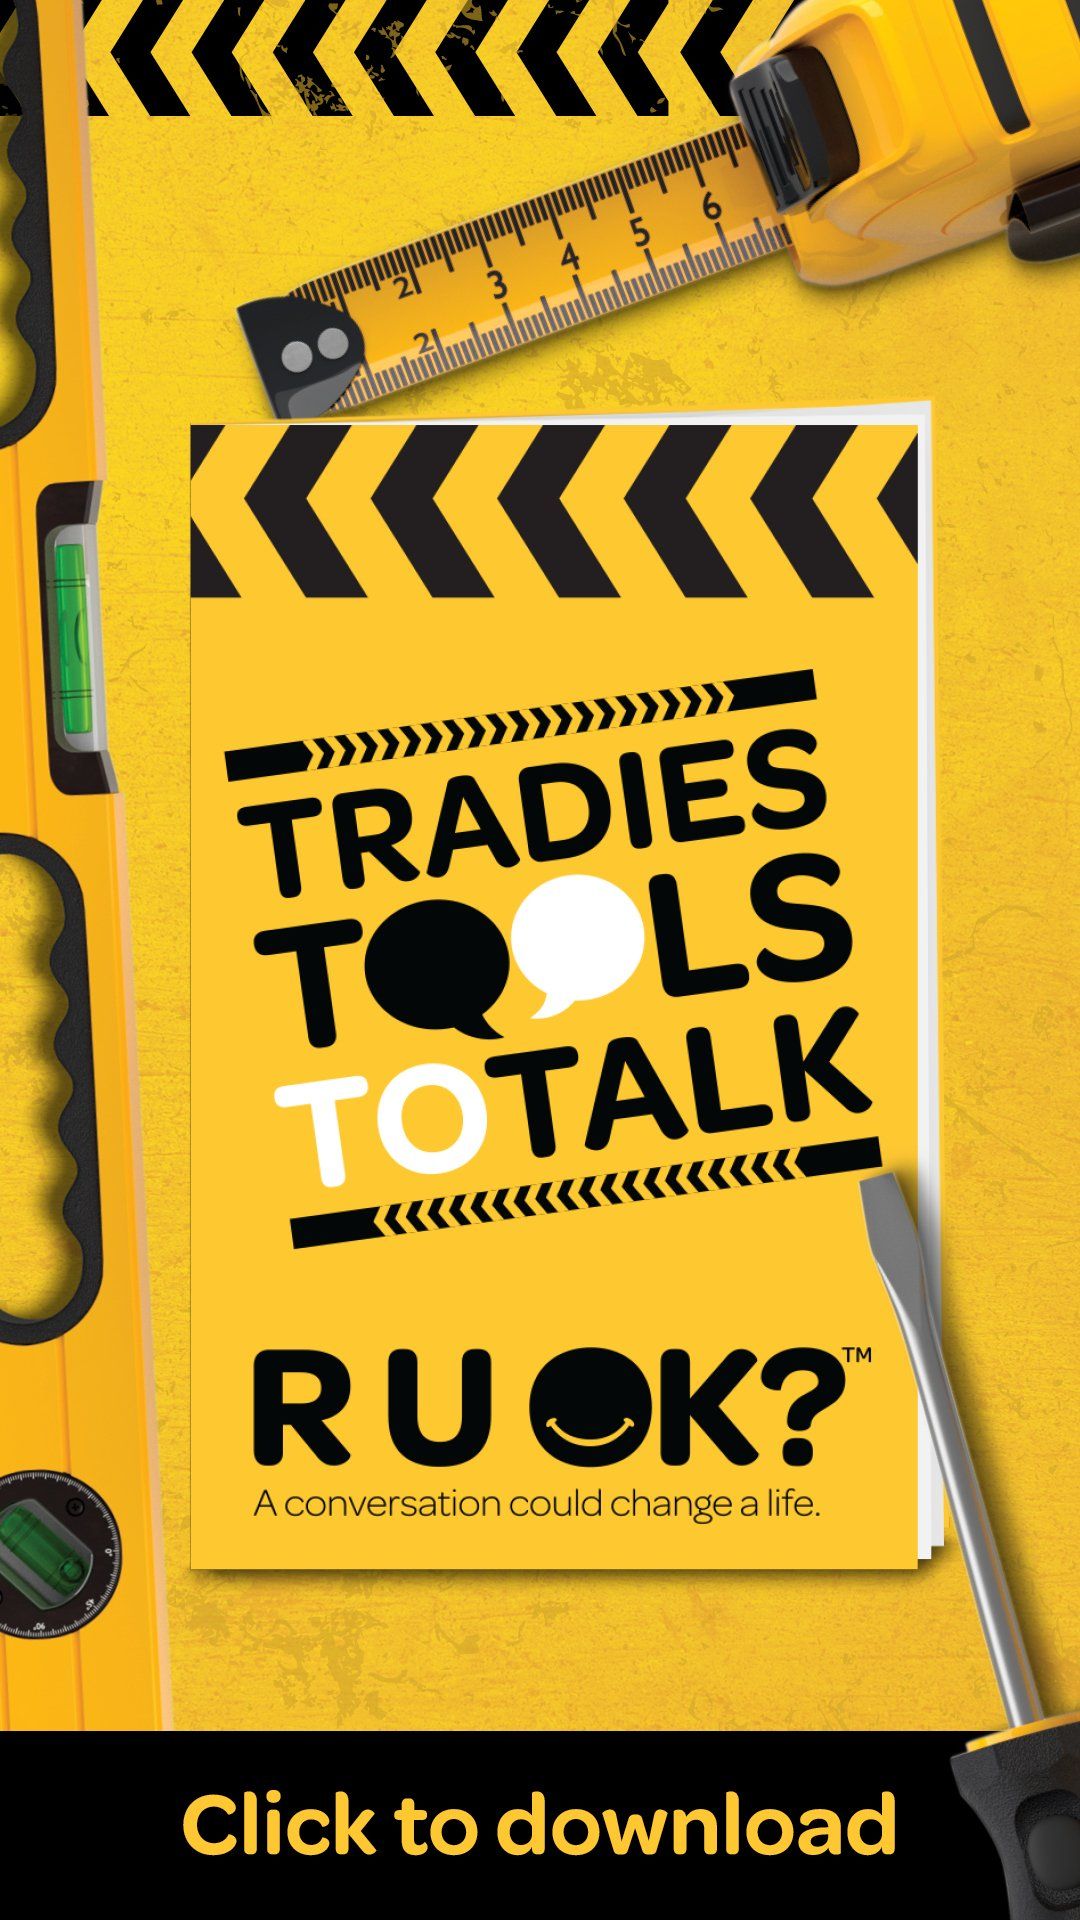 Tradies tools to talk conversation guide, click to download